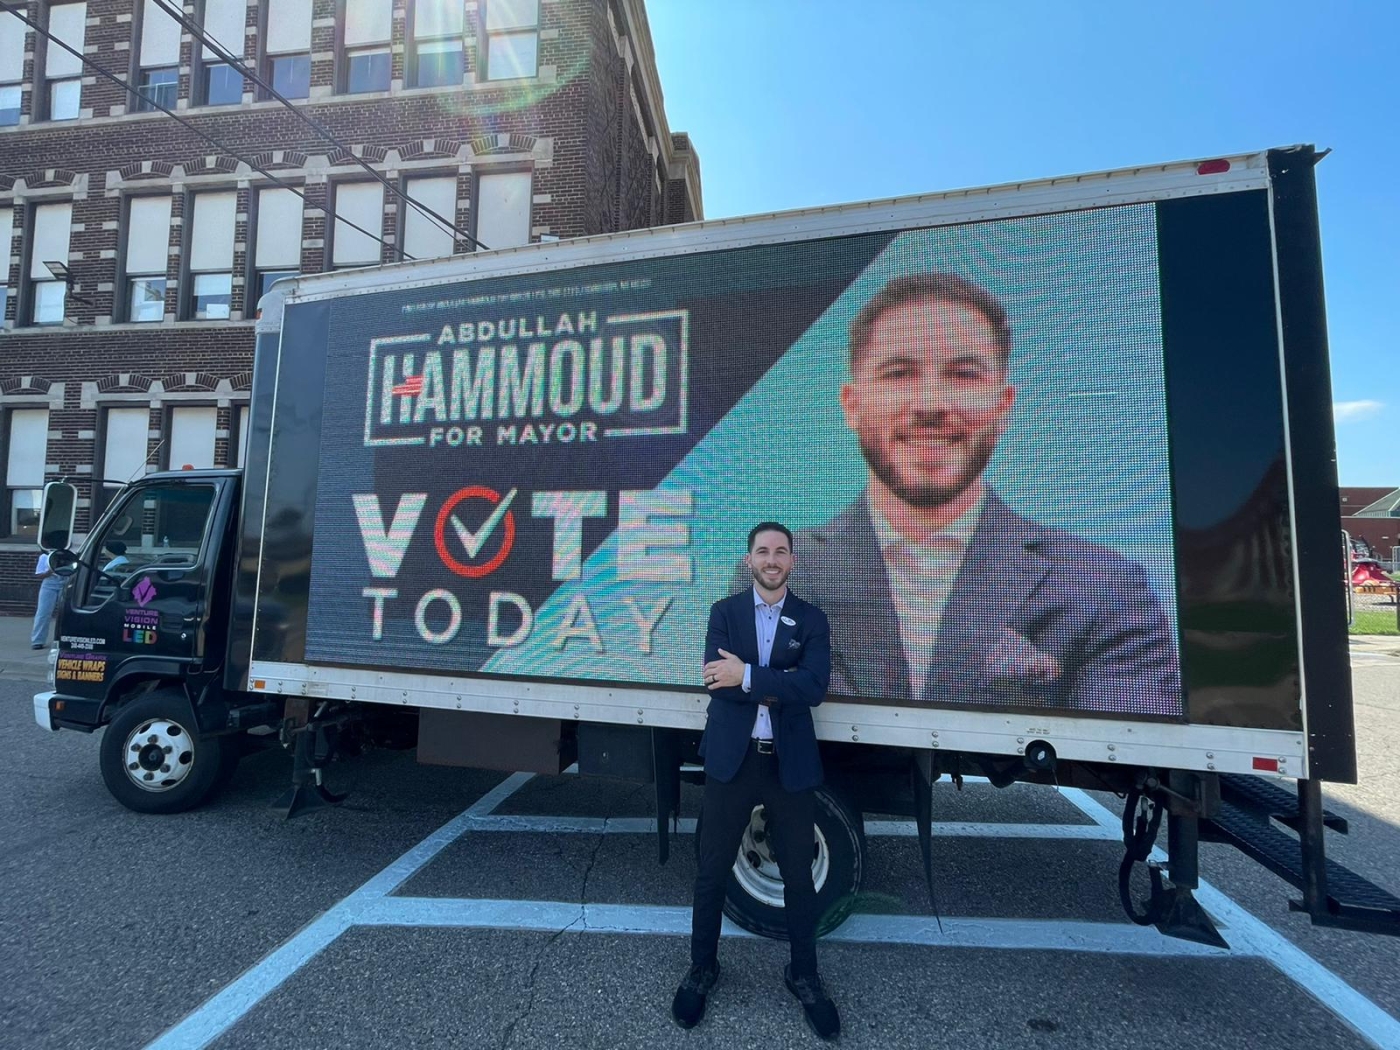 Hammoud could make history in November as the first Arab-American mayor of Dearborn